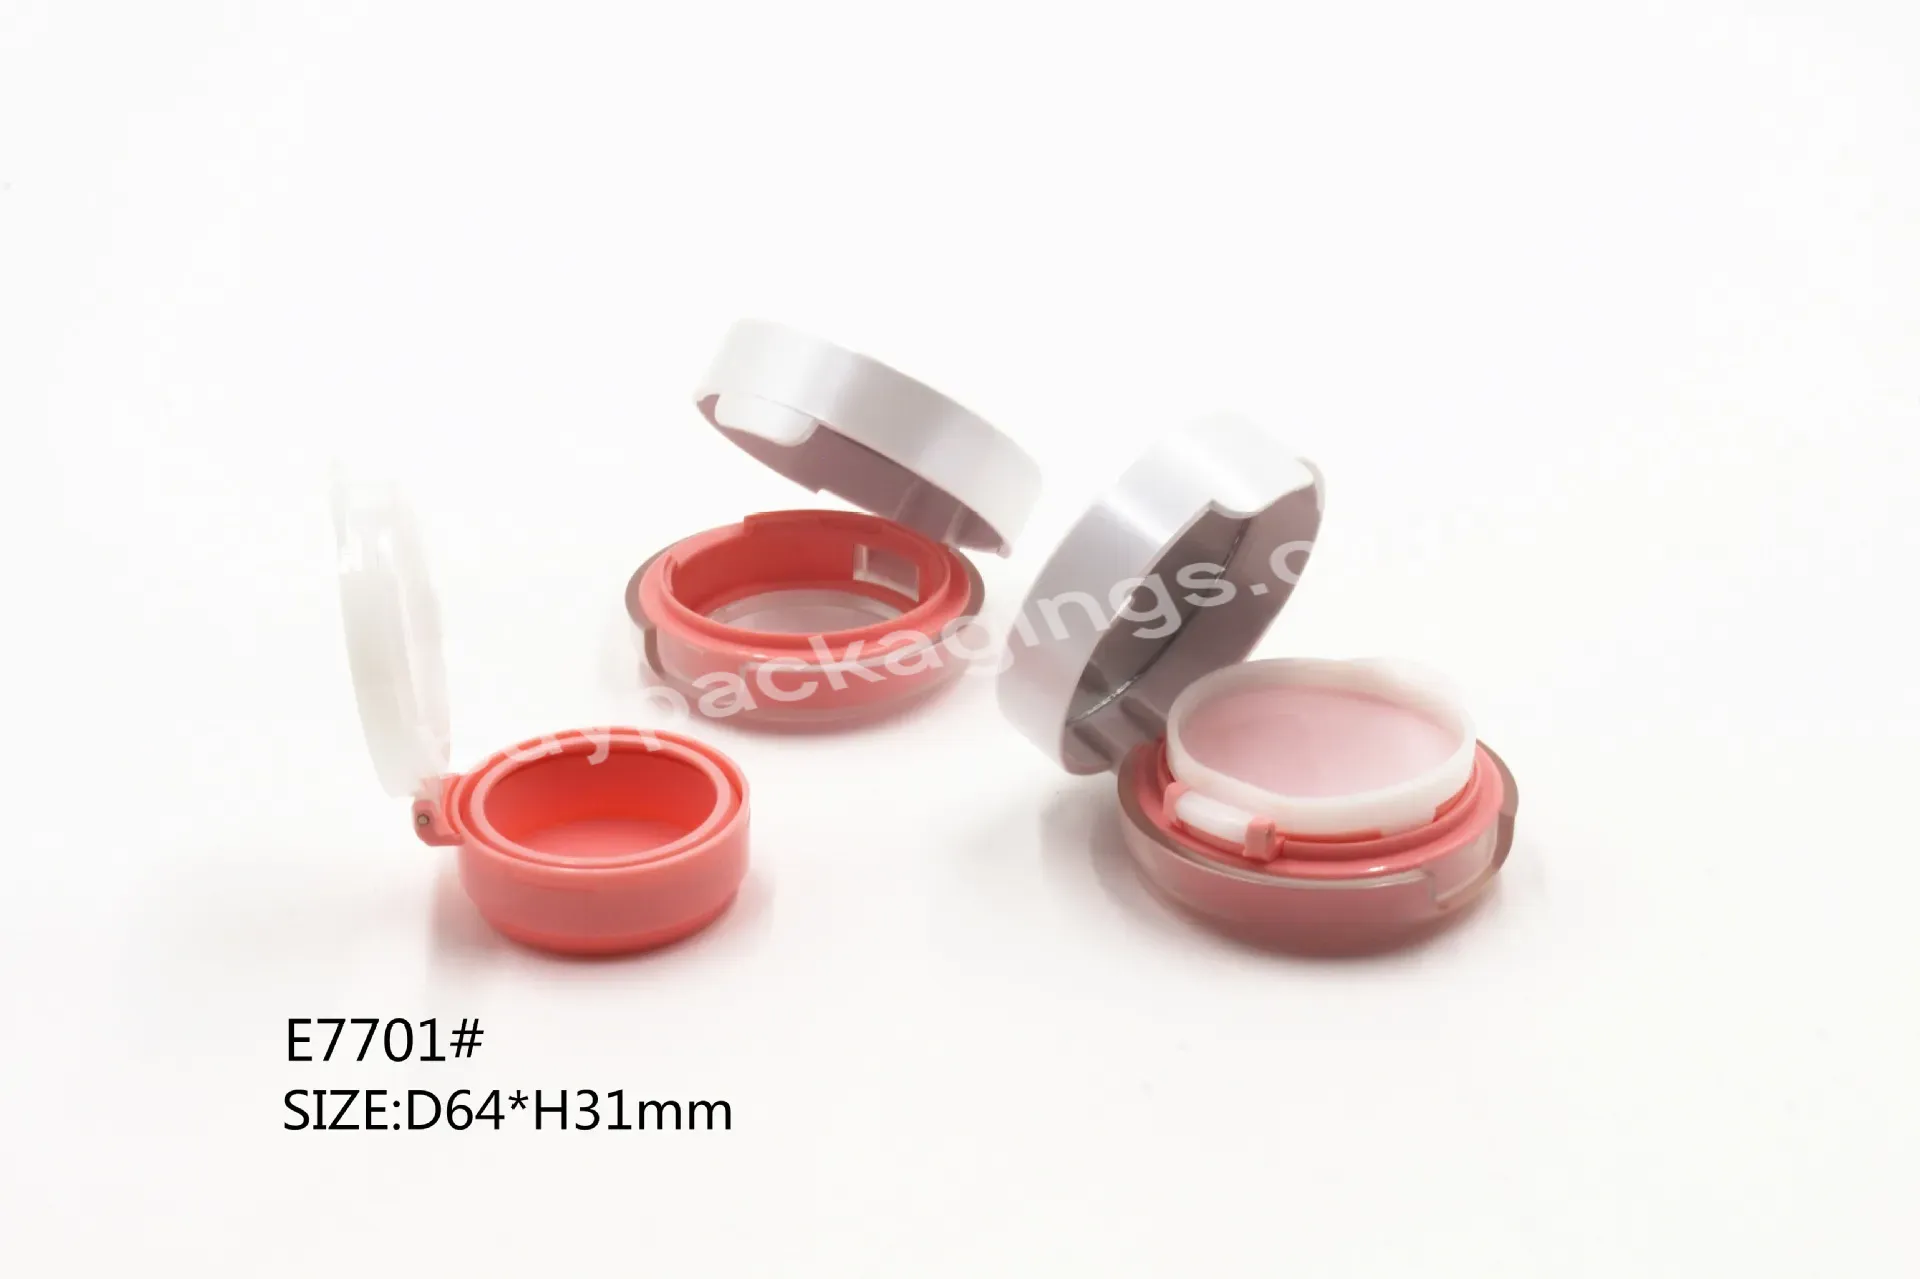 Private Label E7701# Replaceable Air Cushion Liquid Blusher Plastic Packaging Empty Container Case - Buy Air Cushion Liquid Blusher Plastic Packaging,Air Cushion Blusher Empty Container,Liquid Blusher Plastic Packaging.